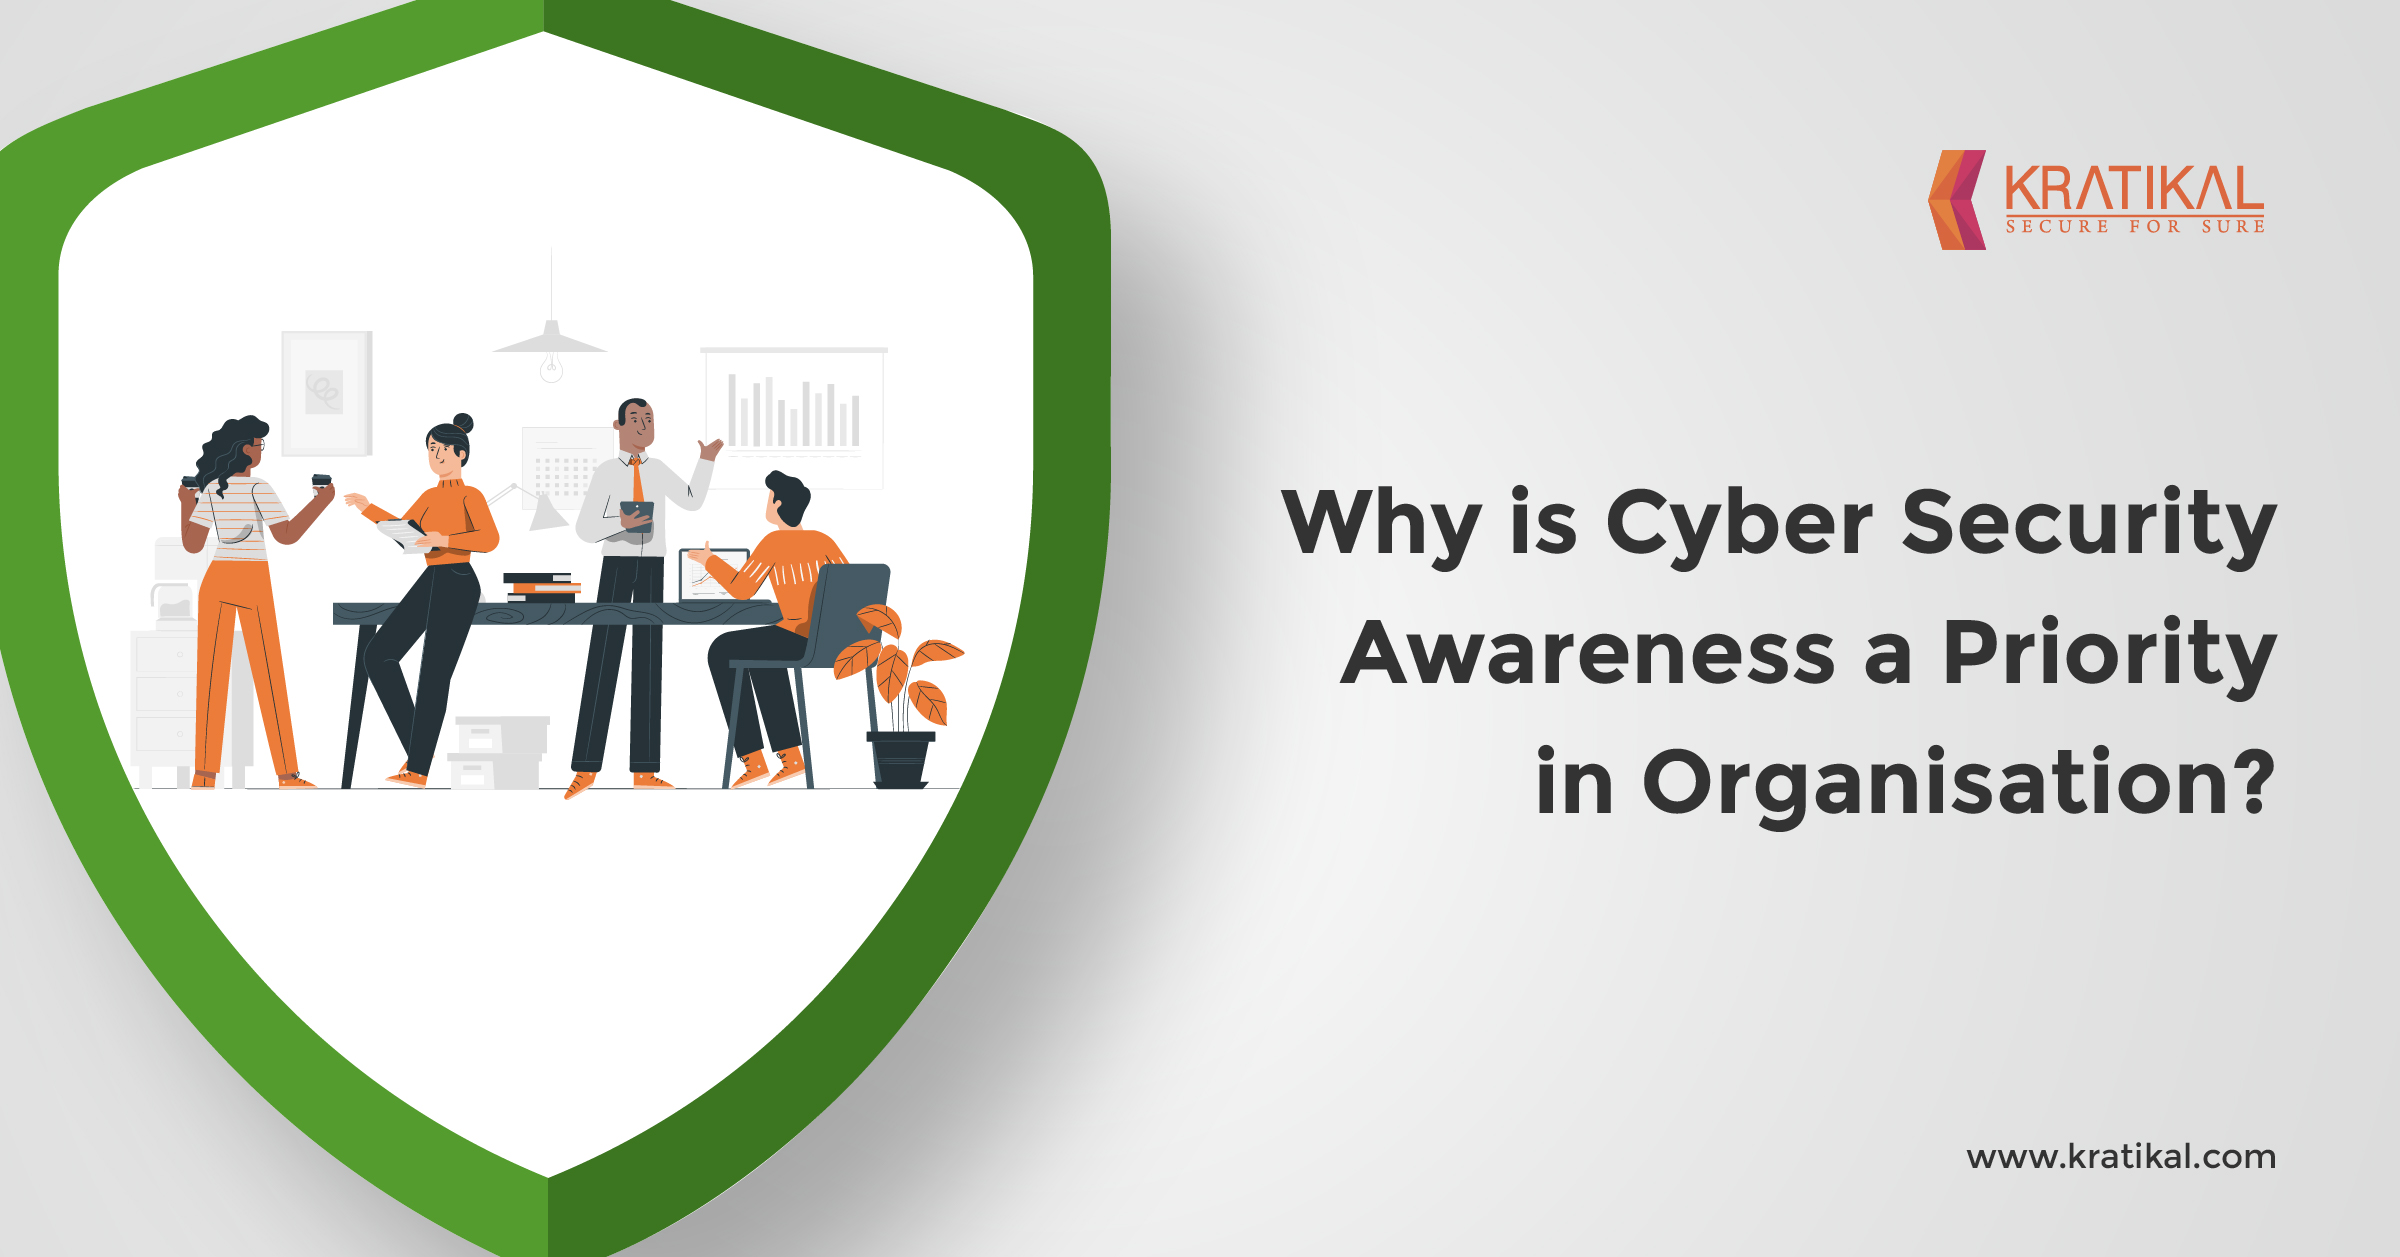 Why is Cyber Security Awareness a Priority in Organizations?